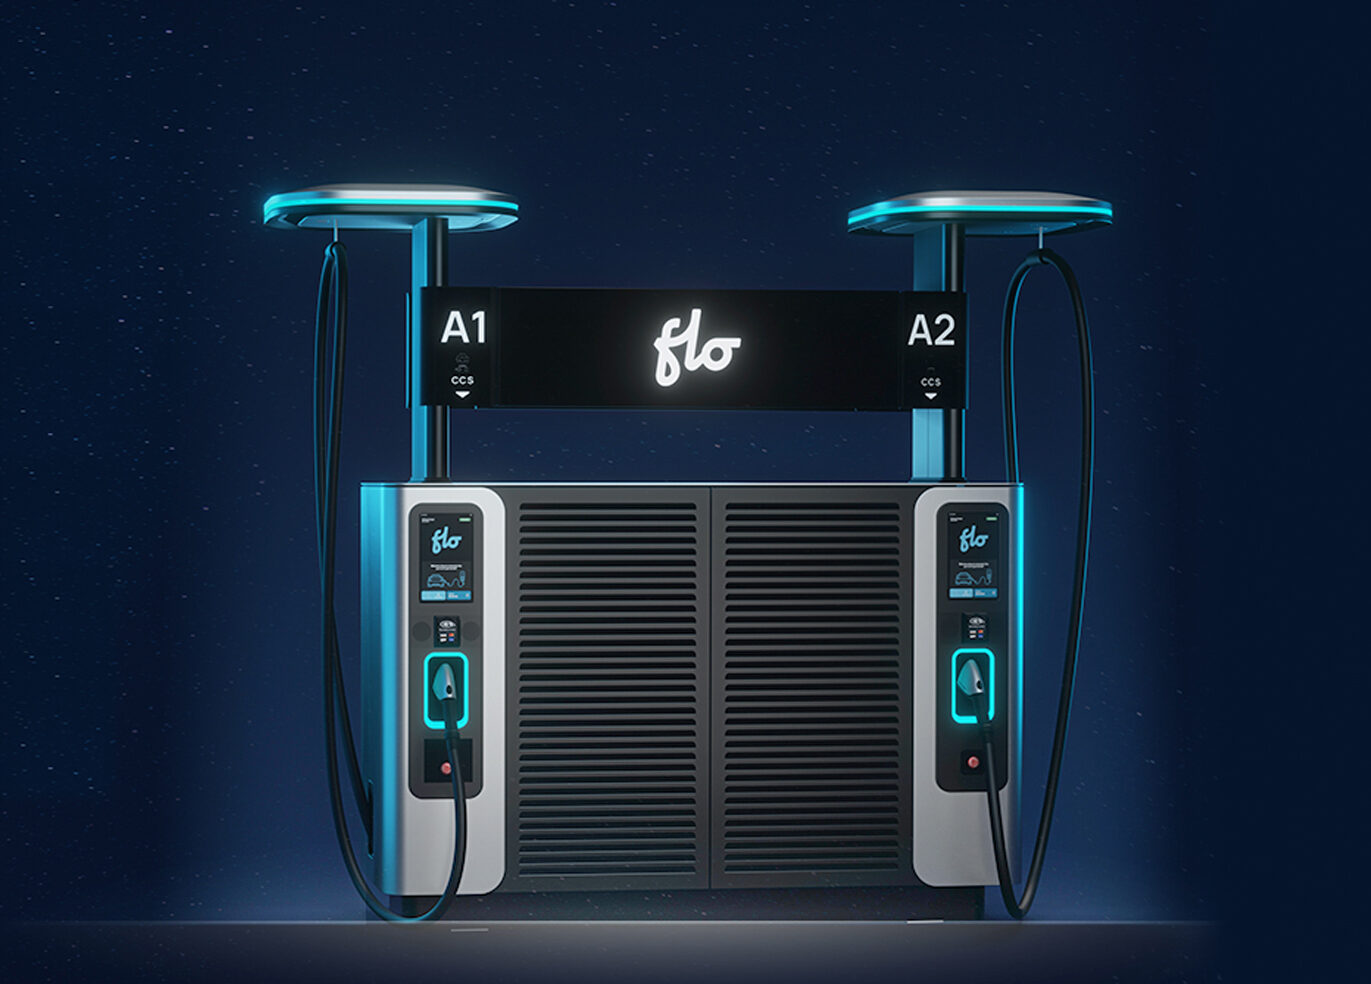 Flo Ultra fast chargers